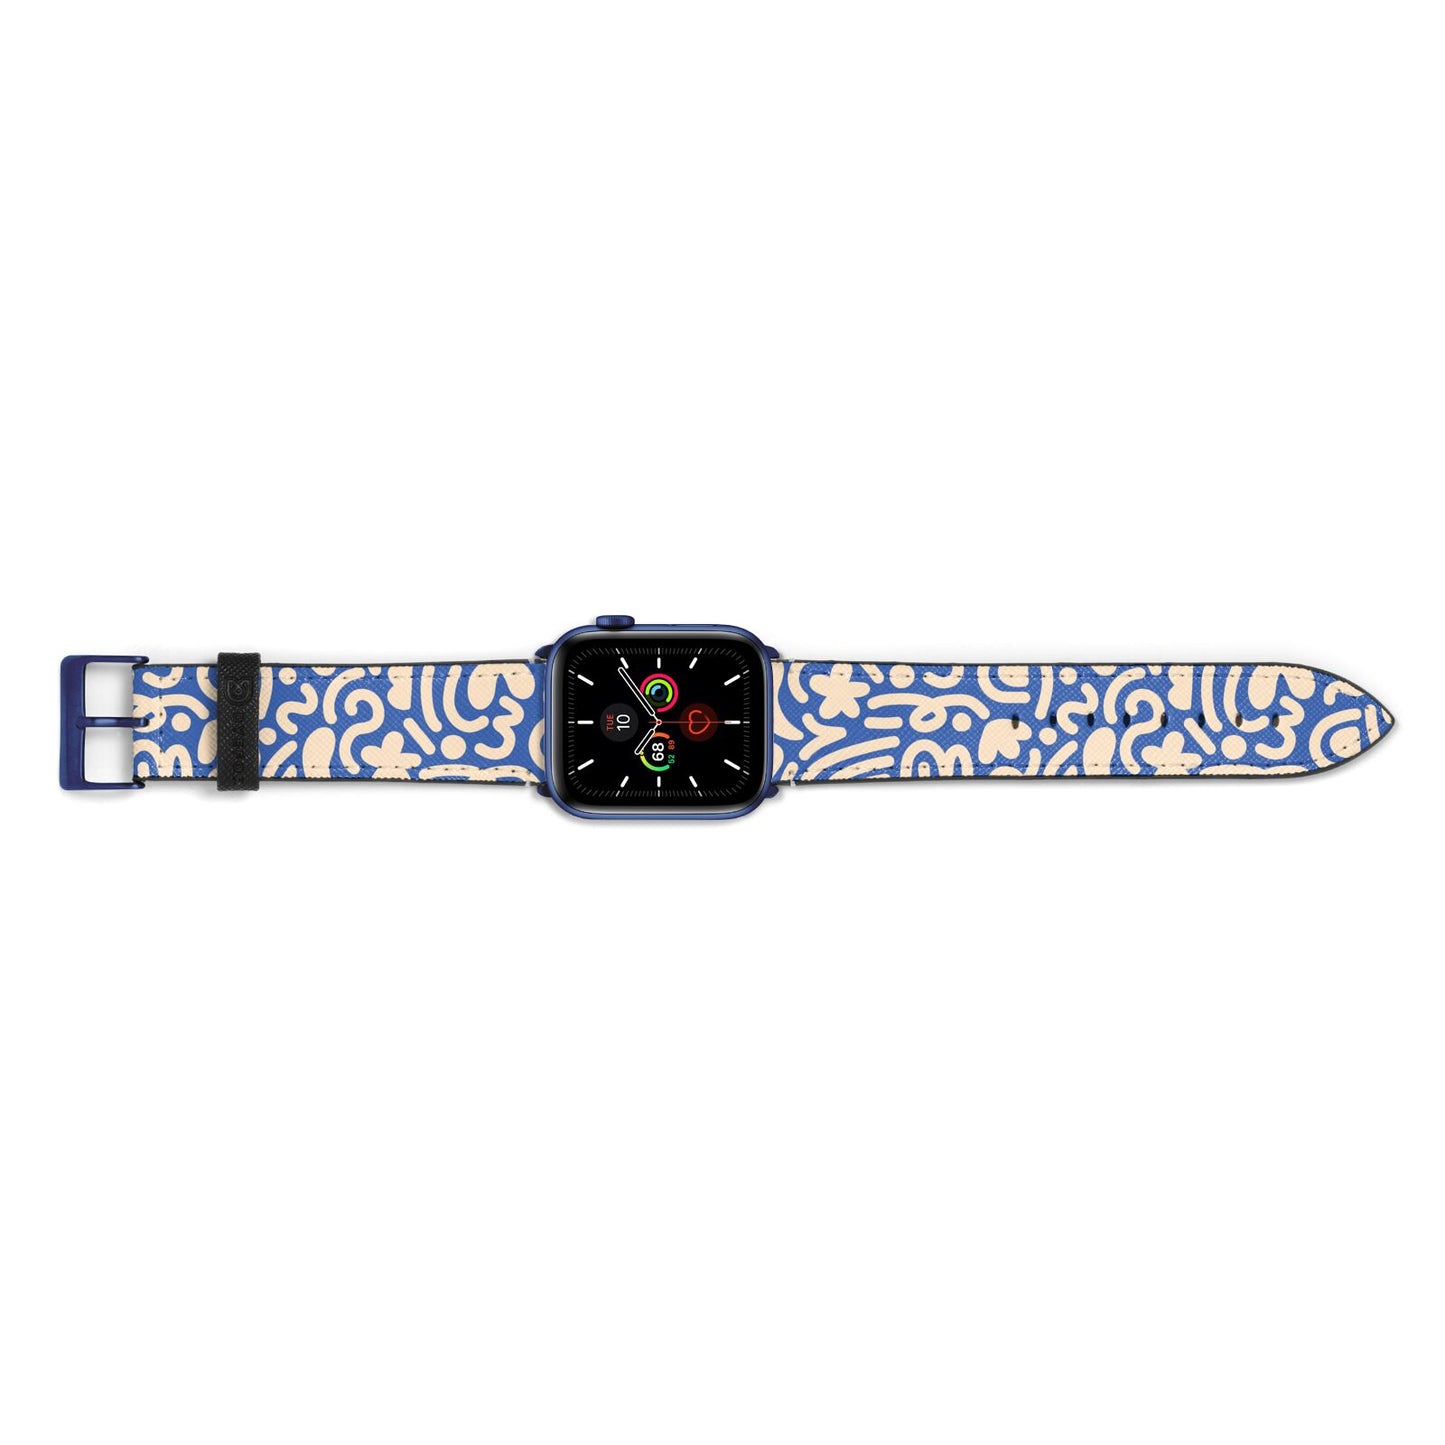 Abstract Apple Watch Strap Landscape Image Blue Hardware